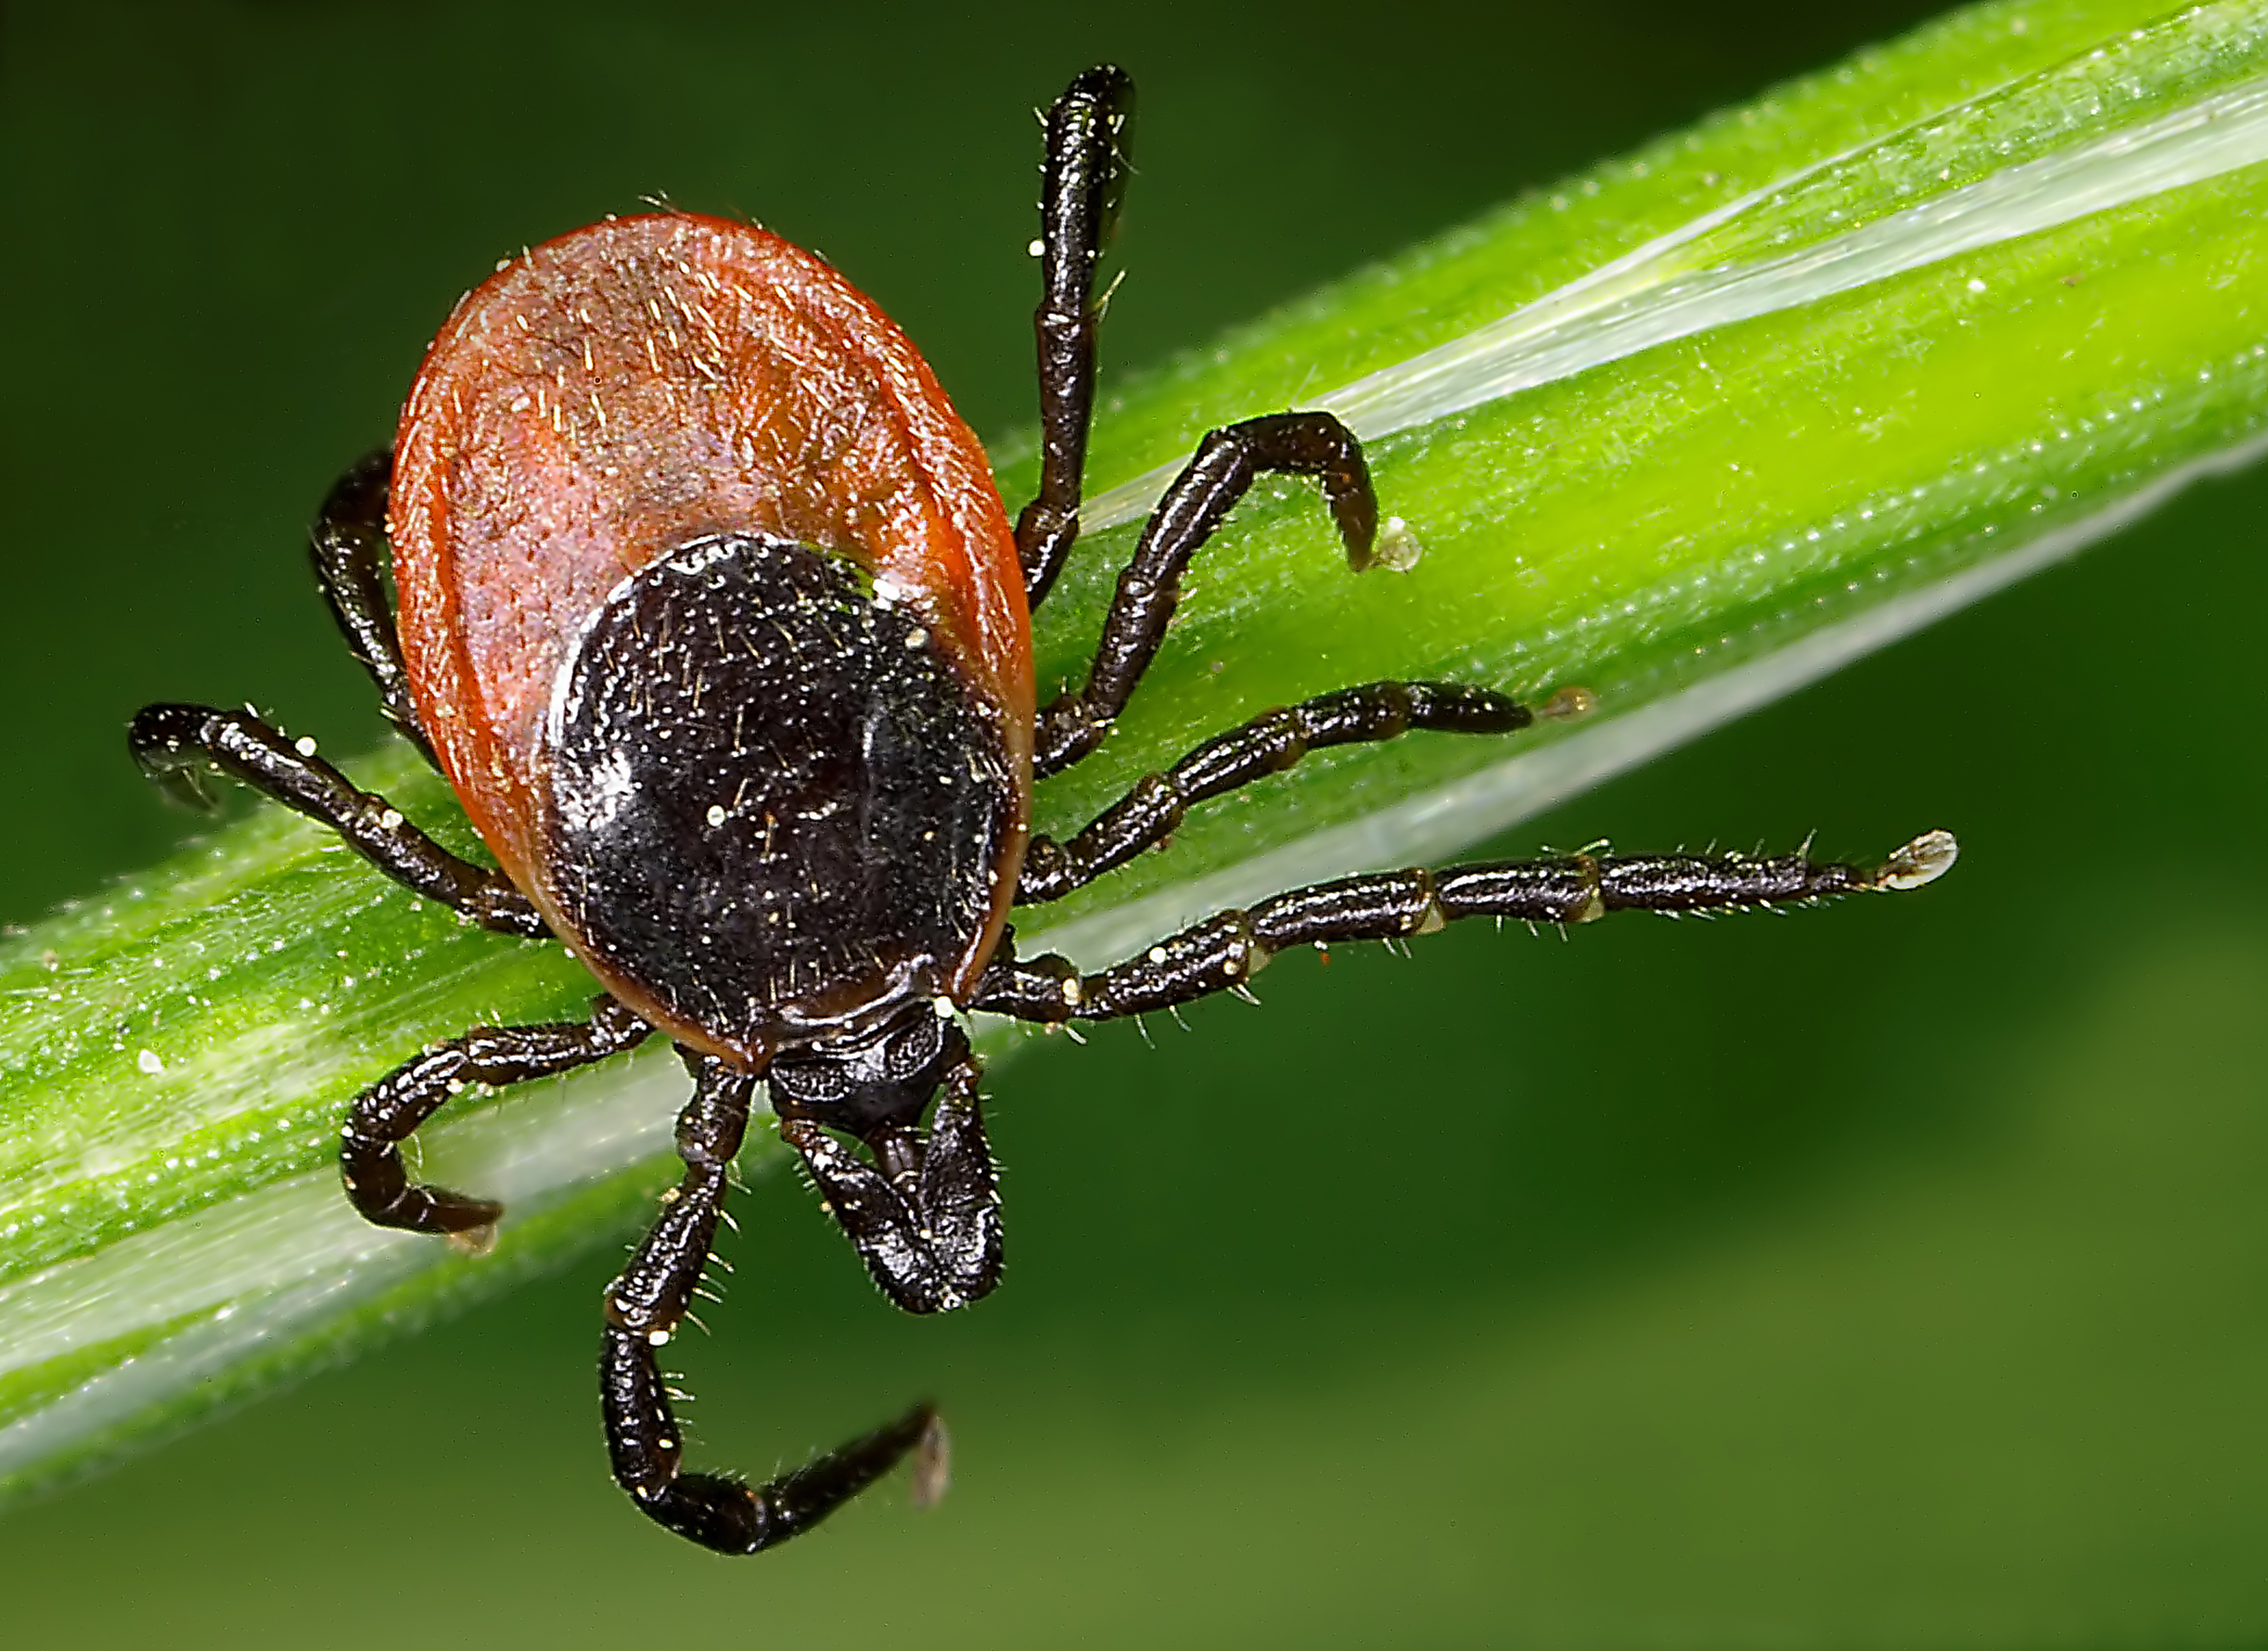 ‘They’re hungry’: Ticks are waking up in Canada as weather warms